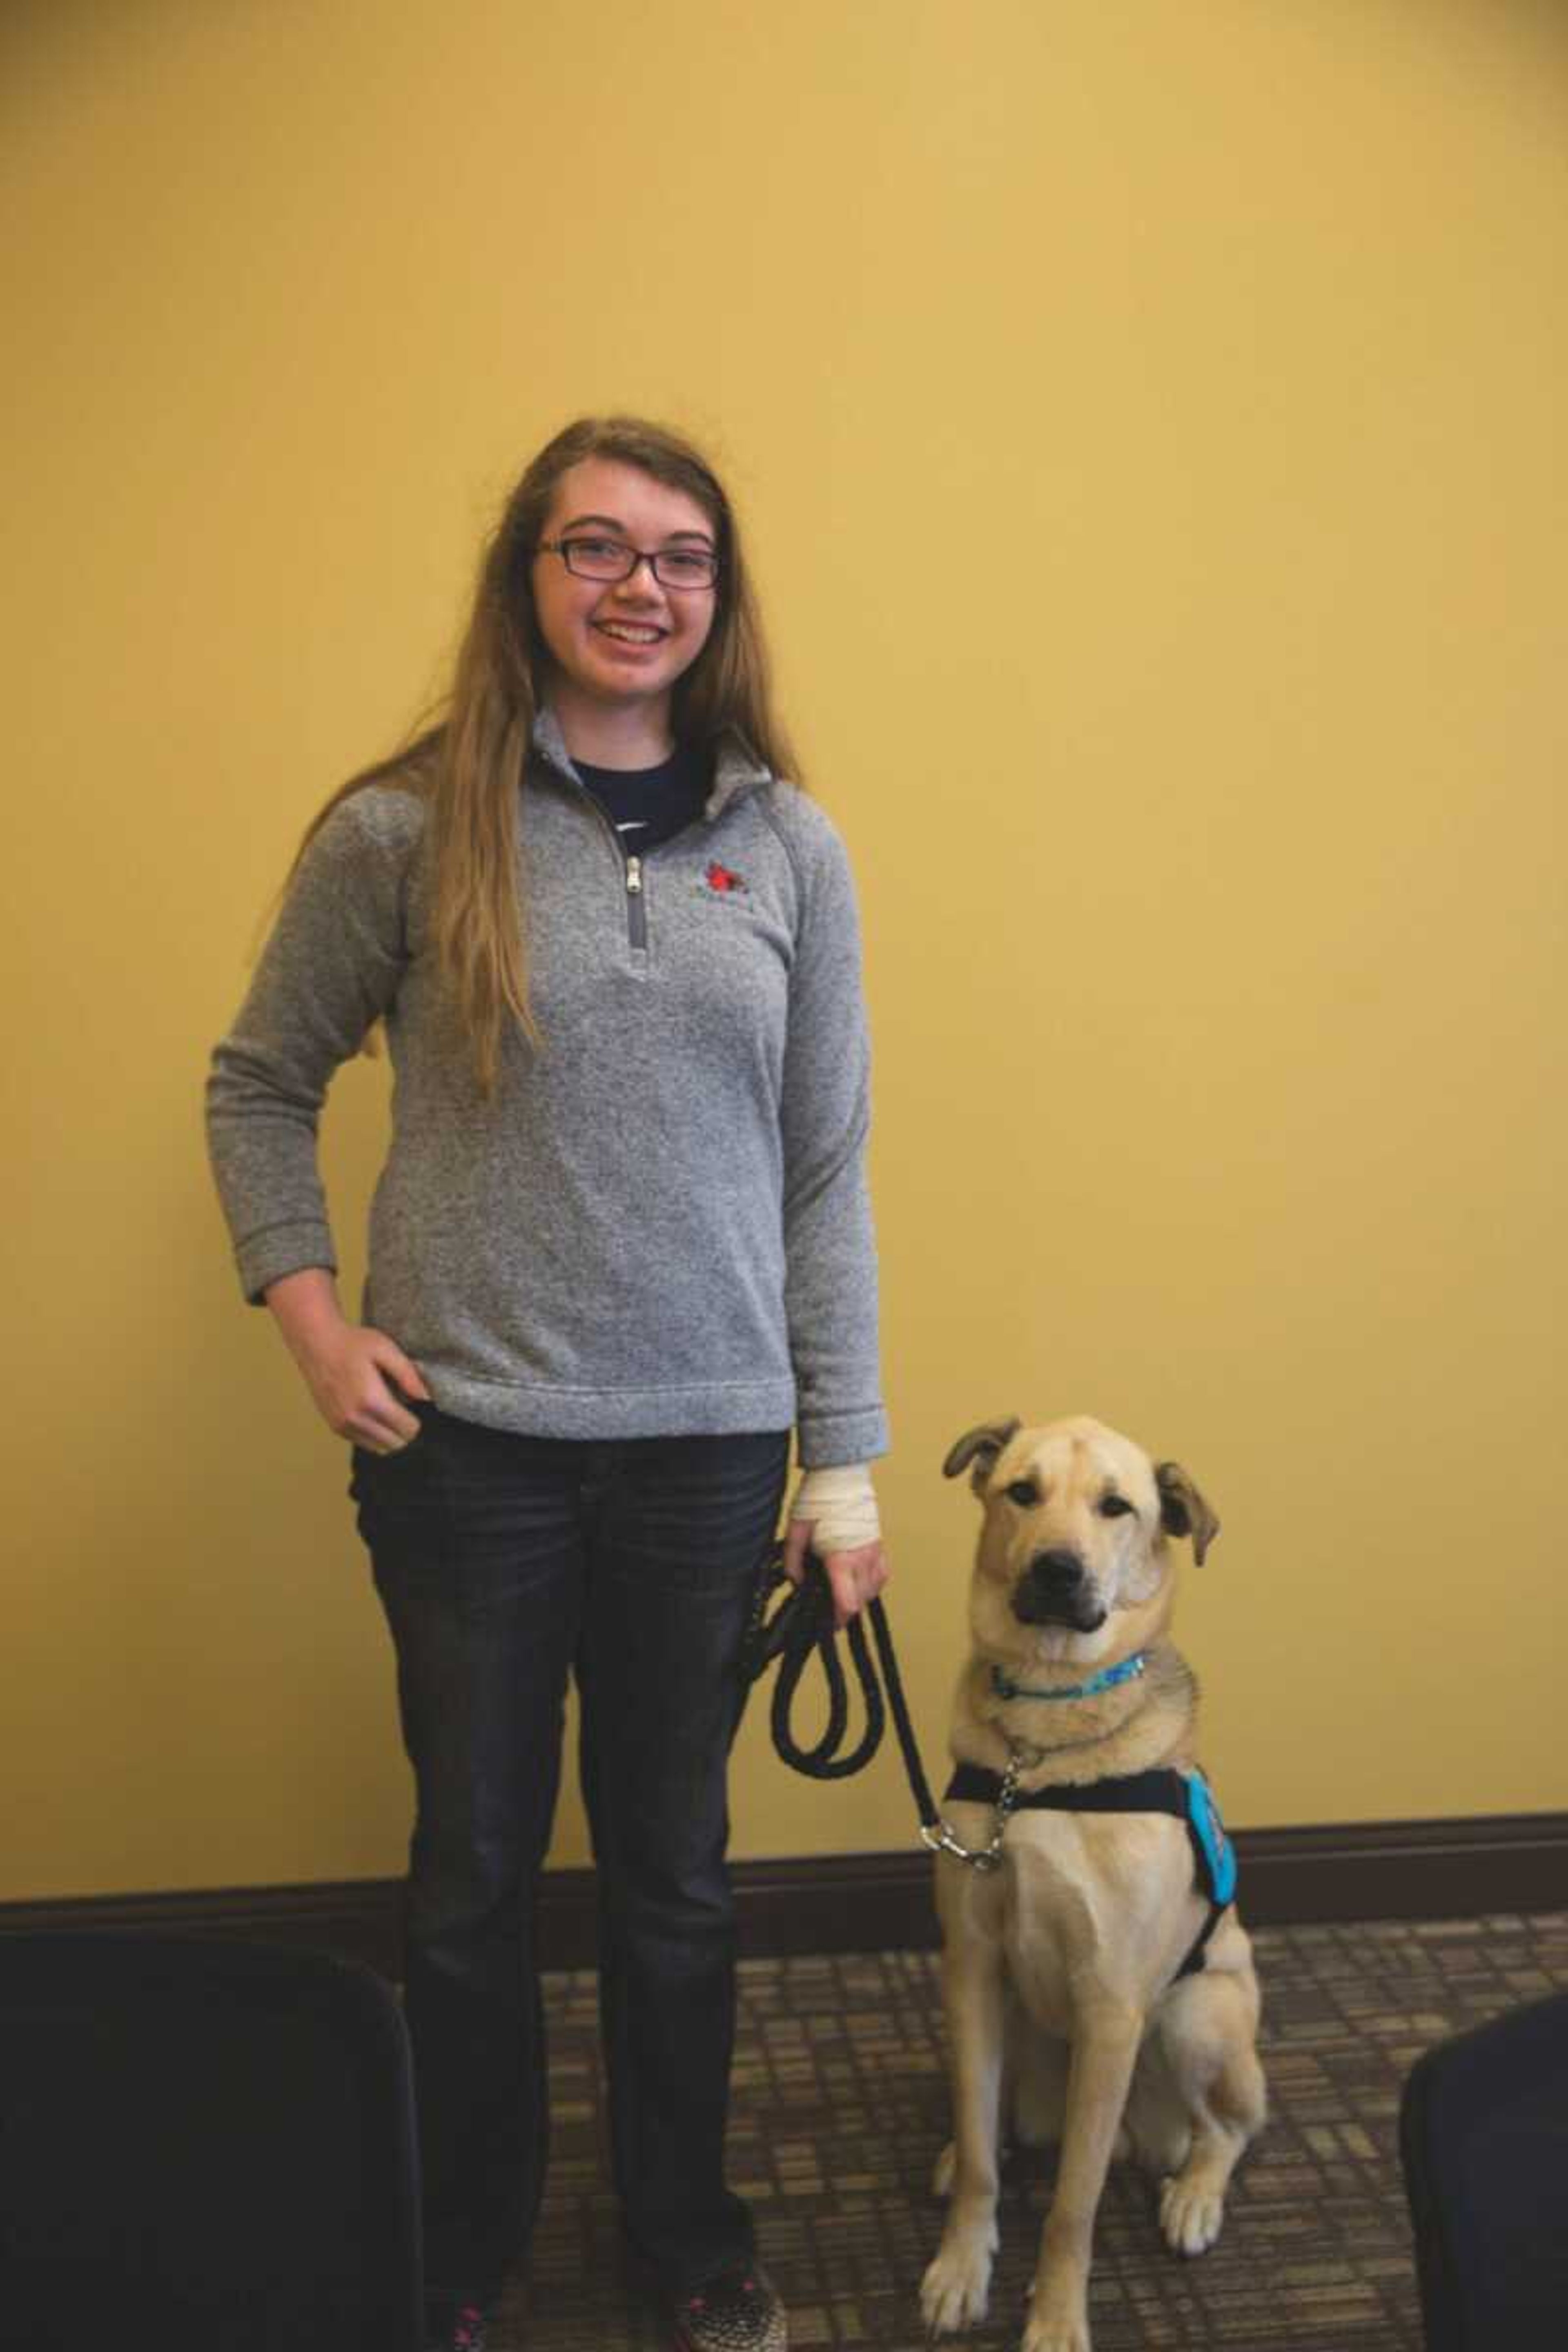 Marissa New poses with her service dog, Creed, in Academic Hall.